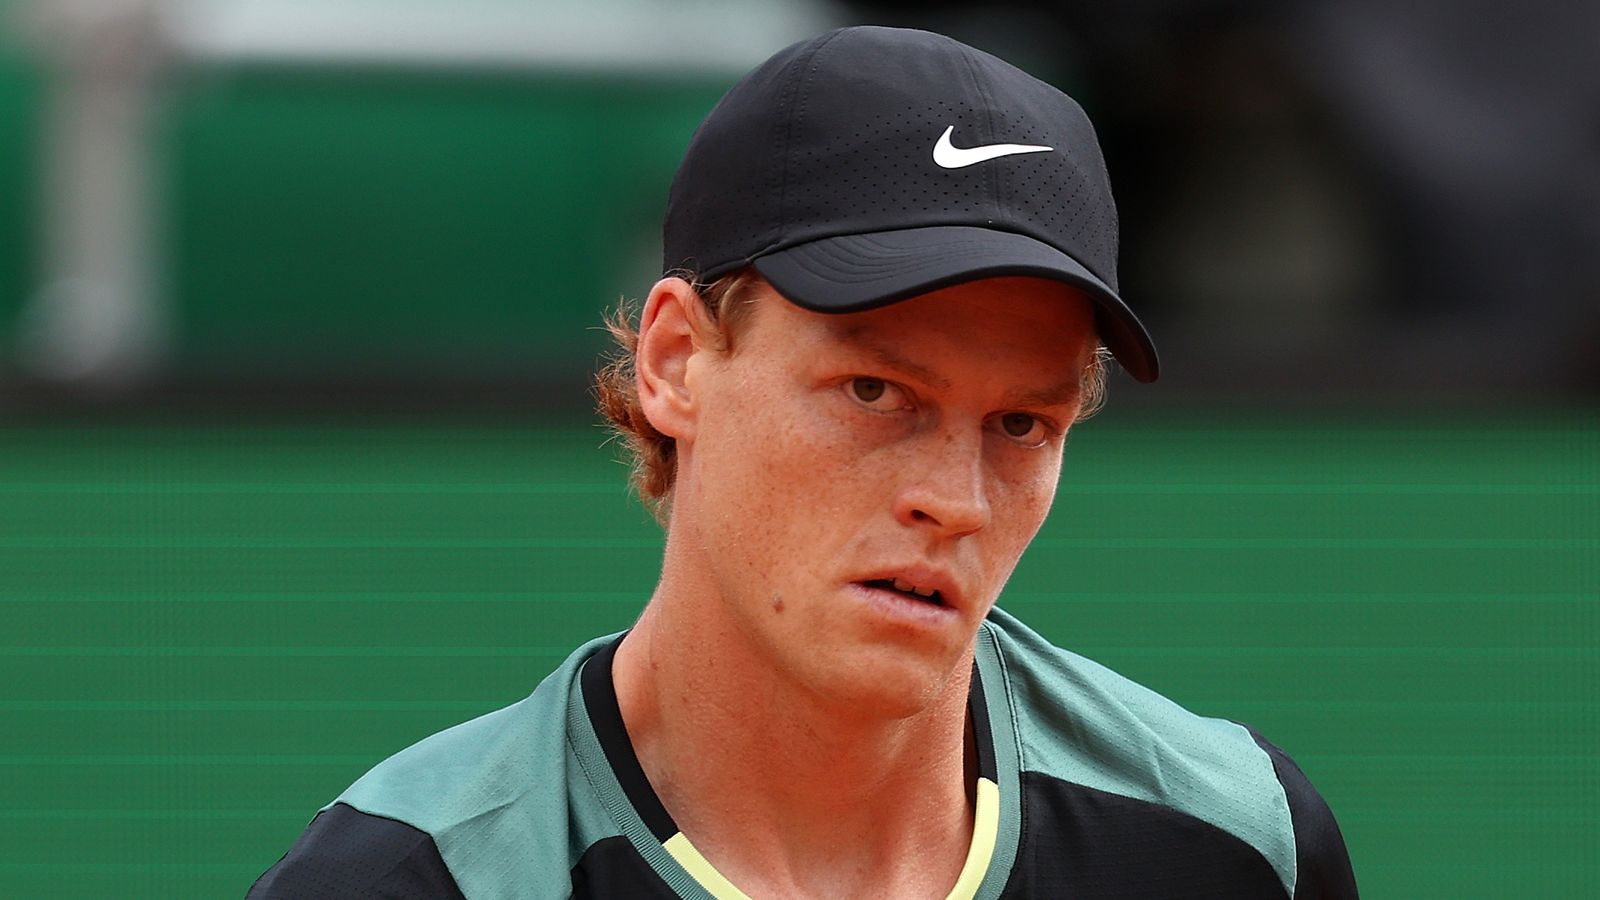 Jannik Sinner: The world No 2 in doubt for Roland Garros as he continues to recover from hip issue